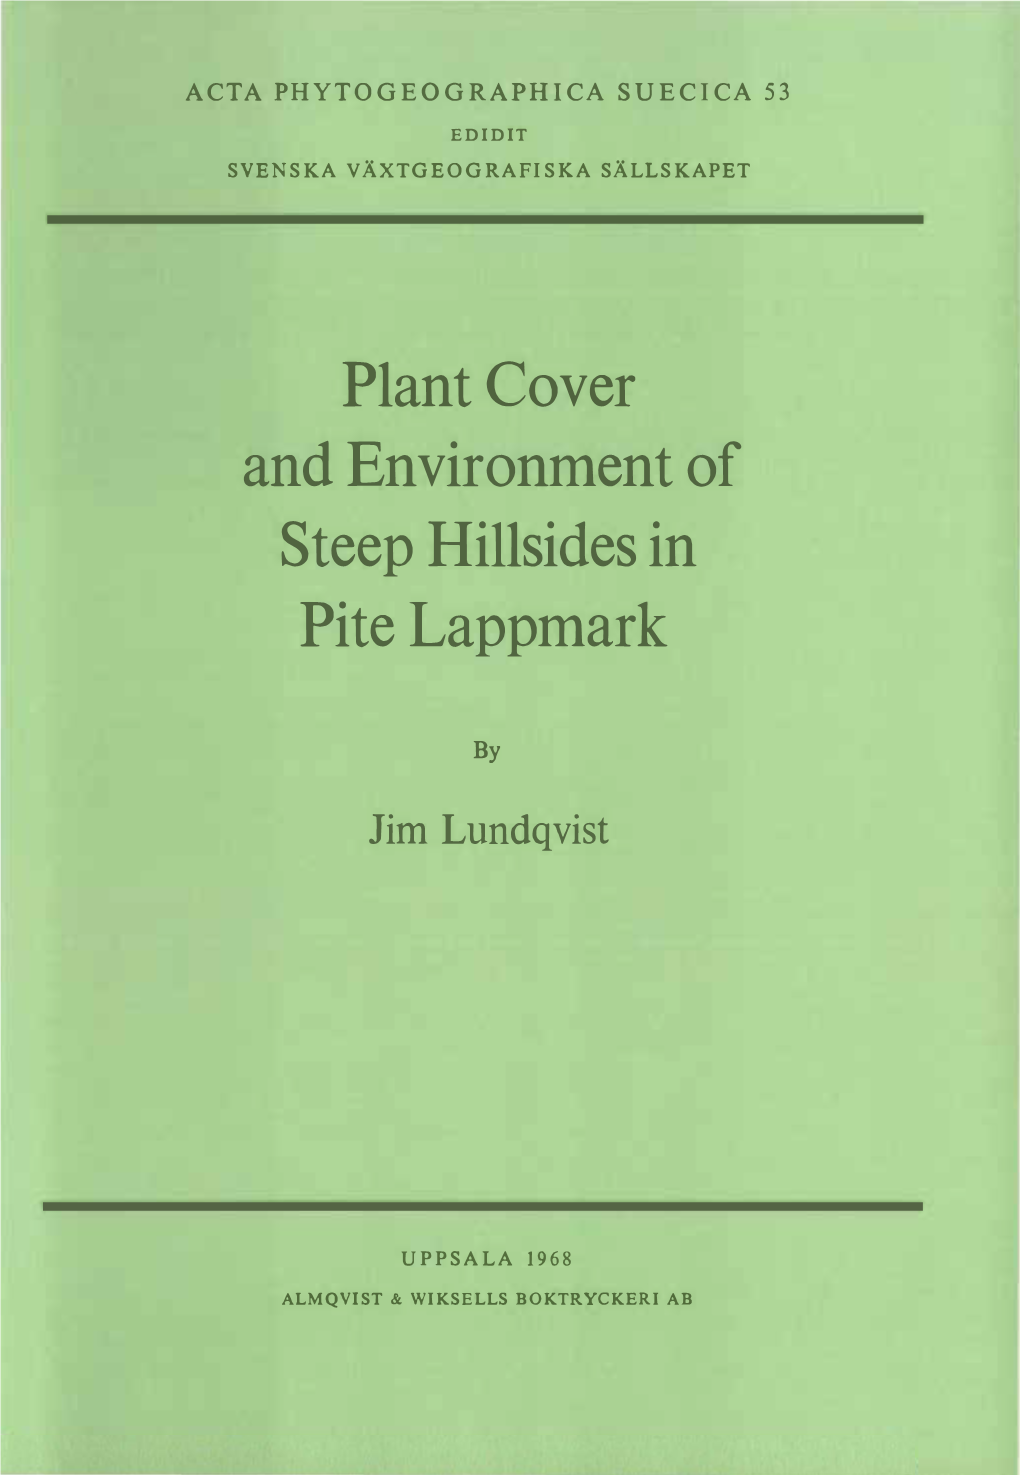 Plant Cover and Environment of Steep Hillsides in Pite Lappmark